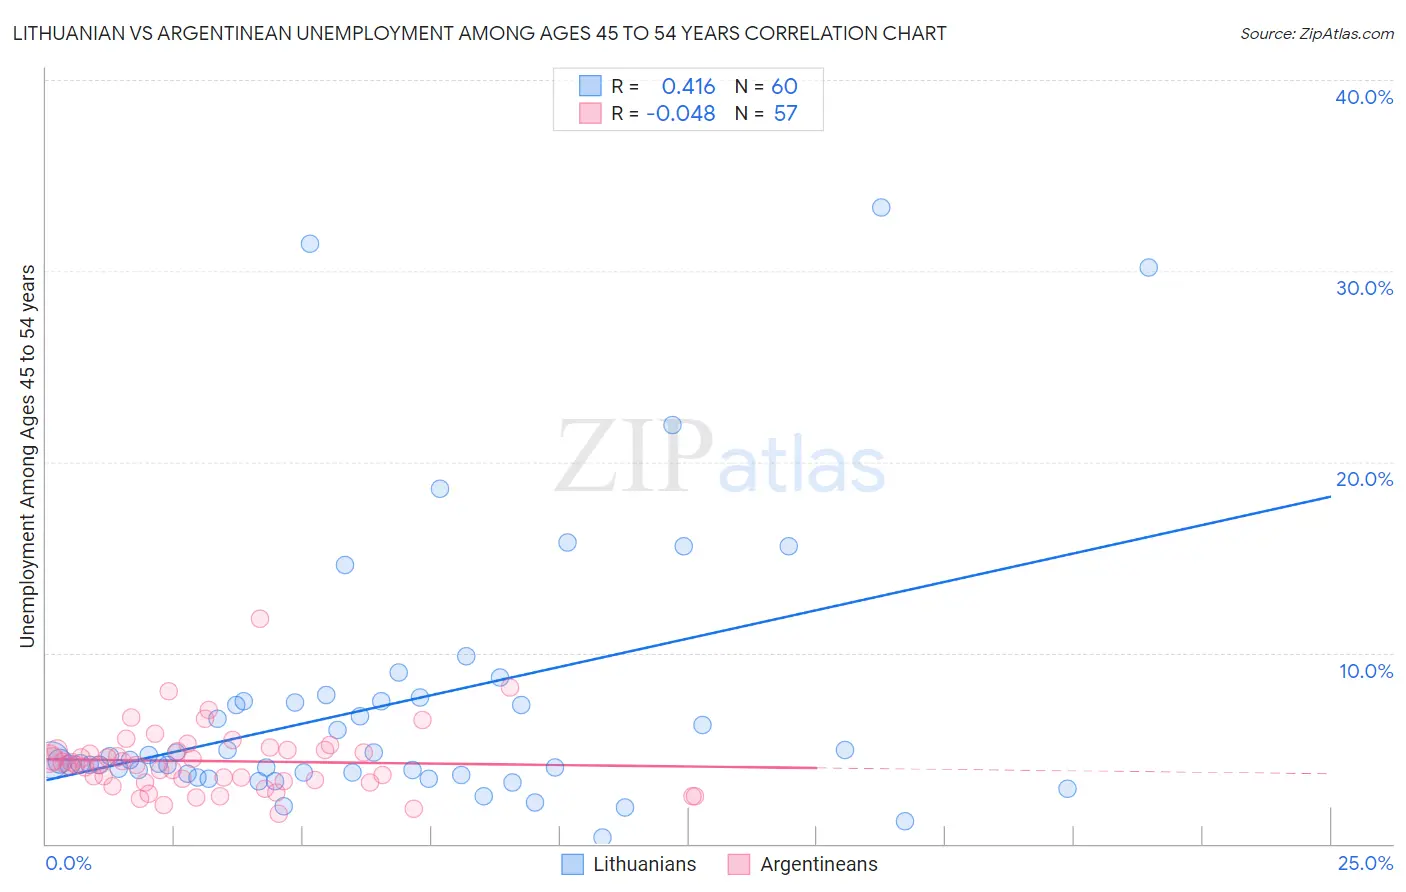 Lithuanian vs Argentinean Unemployment Among Ages 45 to 54 years